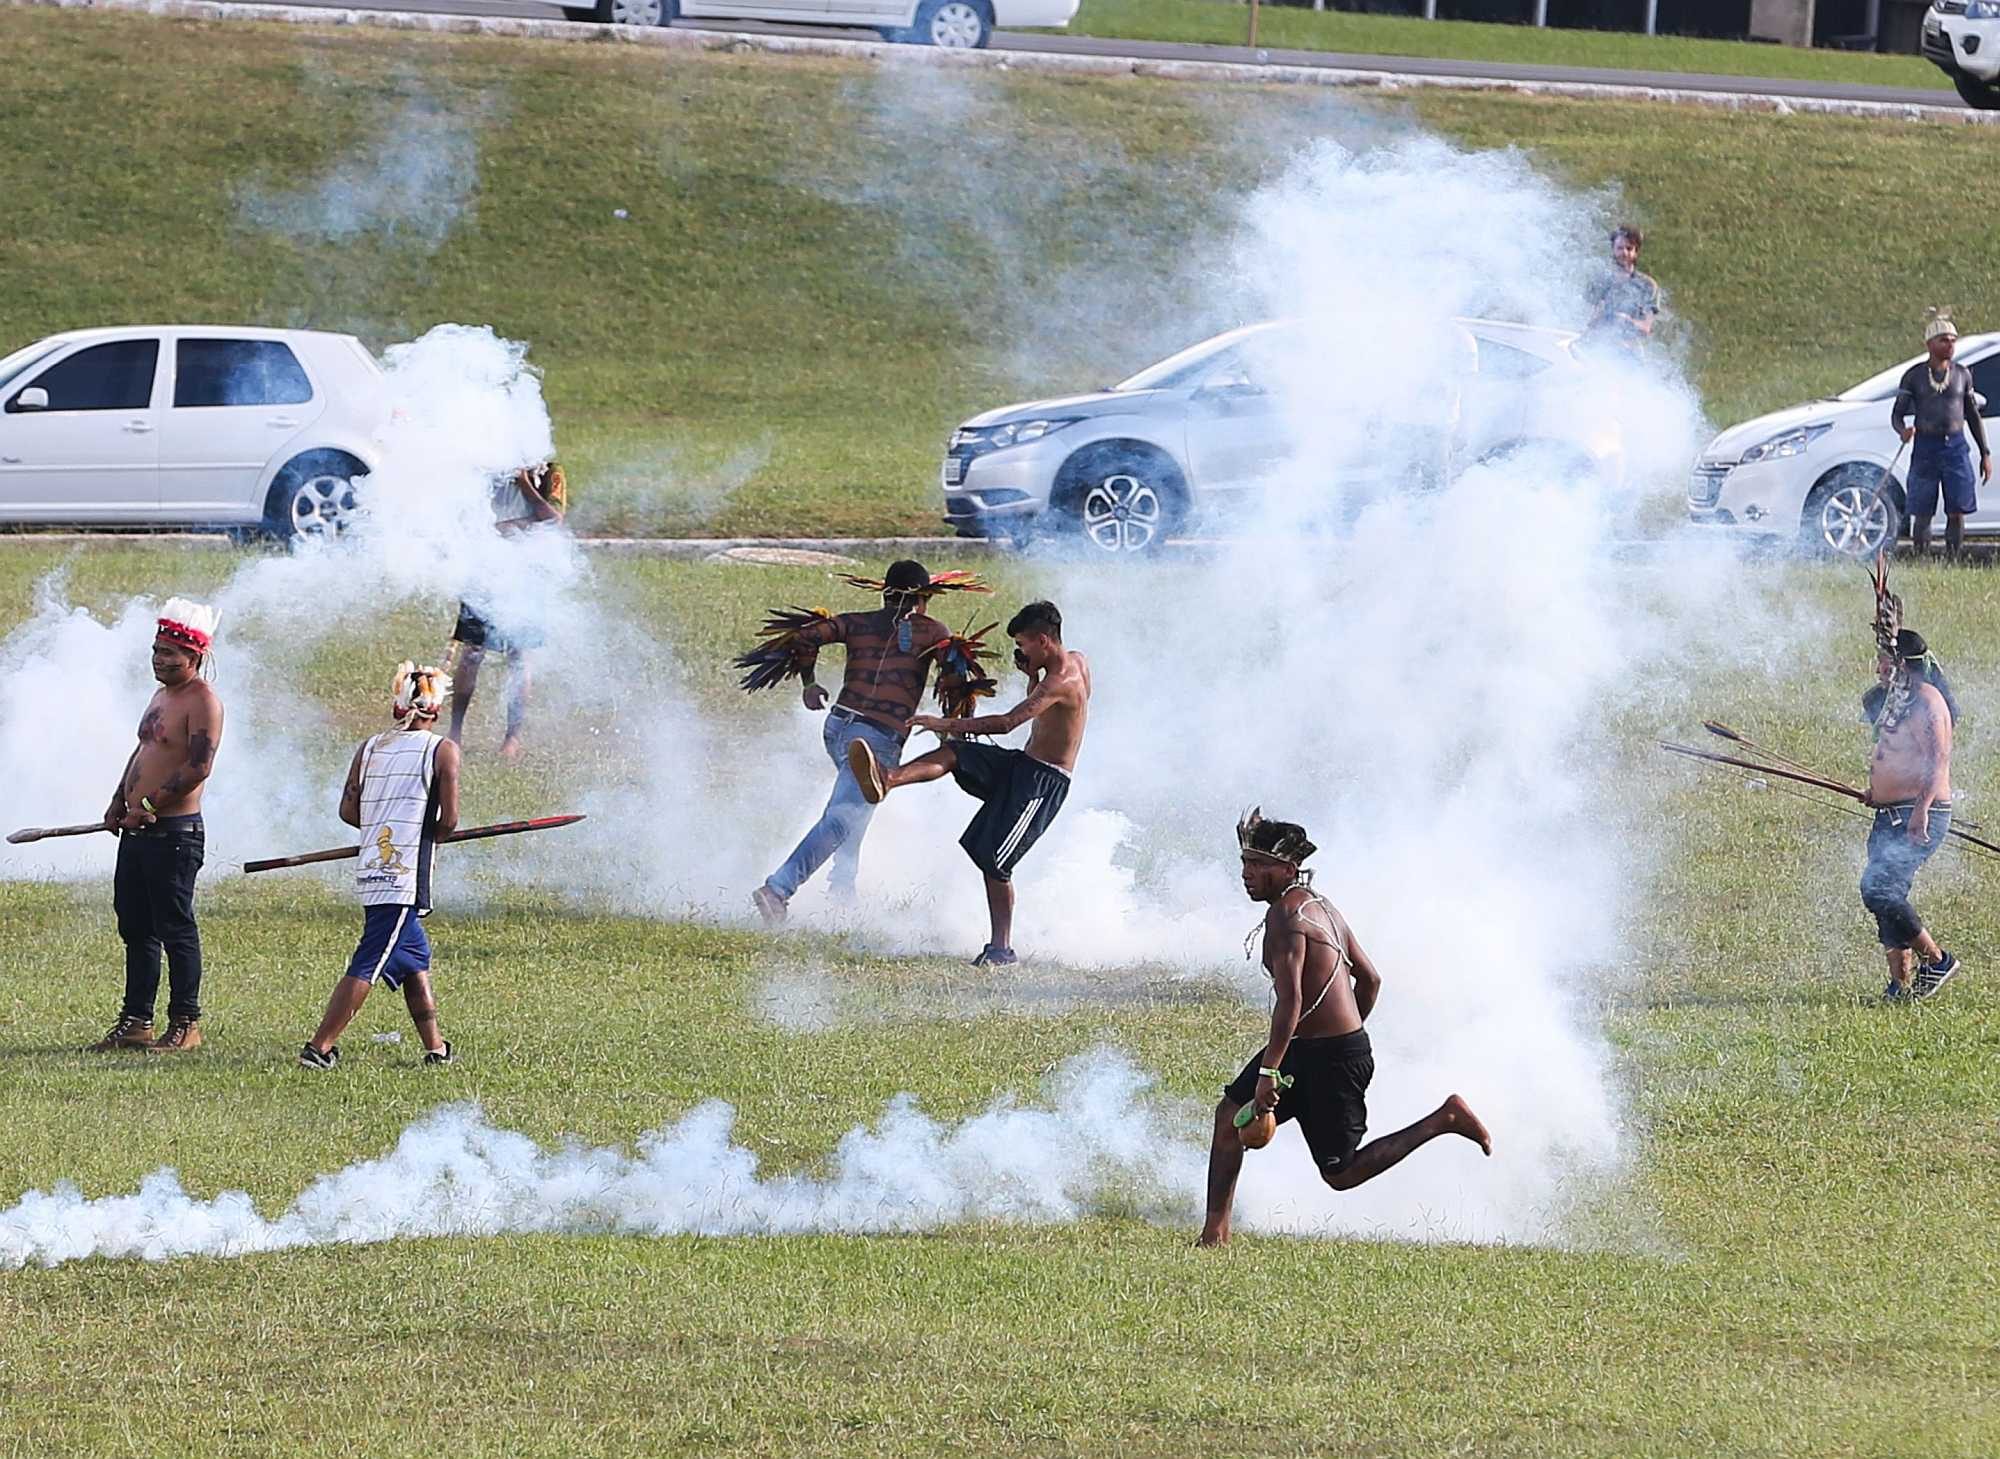 Indians Kick Tear Gas and attack police with arrows - Wilson Dias/ABr